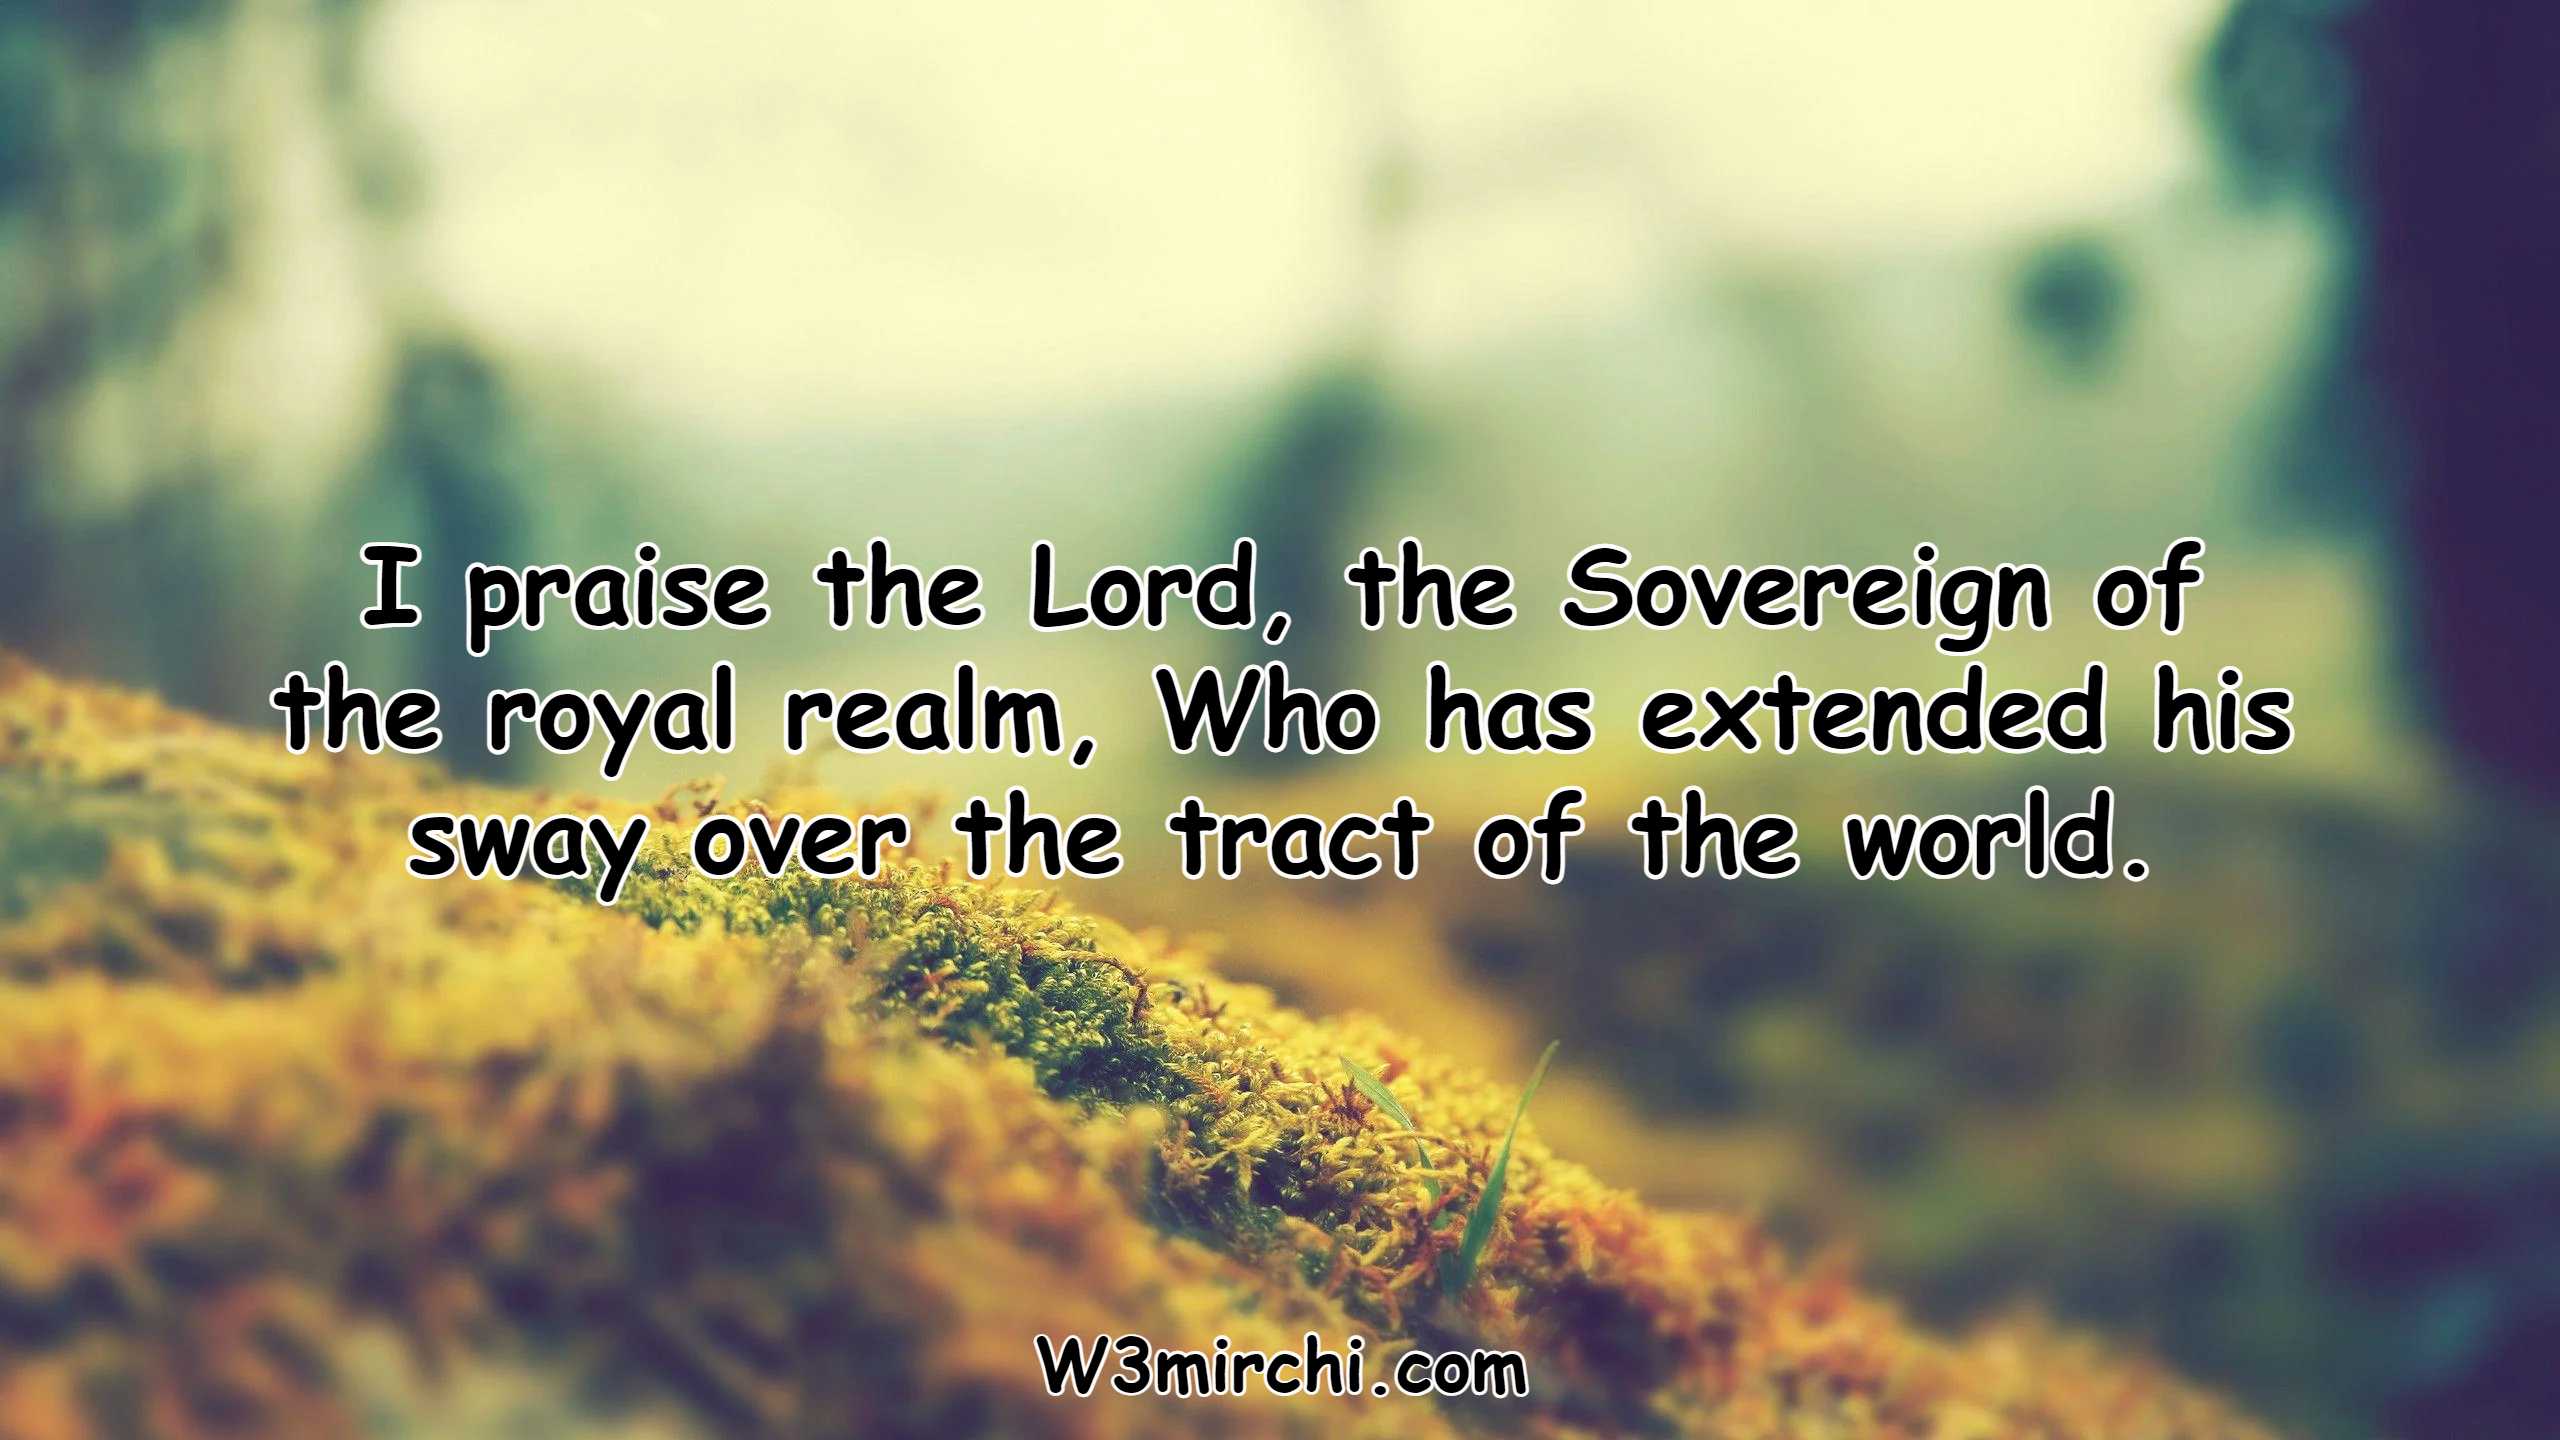 I praise the Lord, the Sovereign of the royal realm,